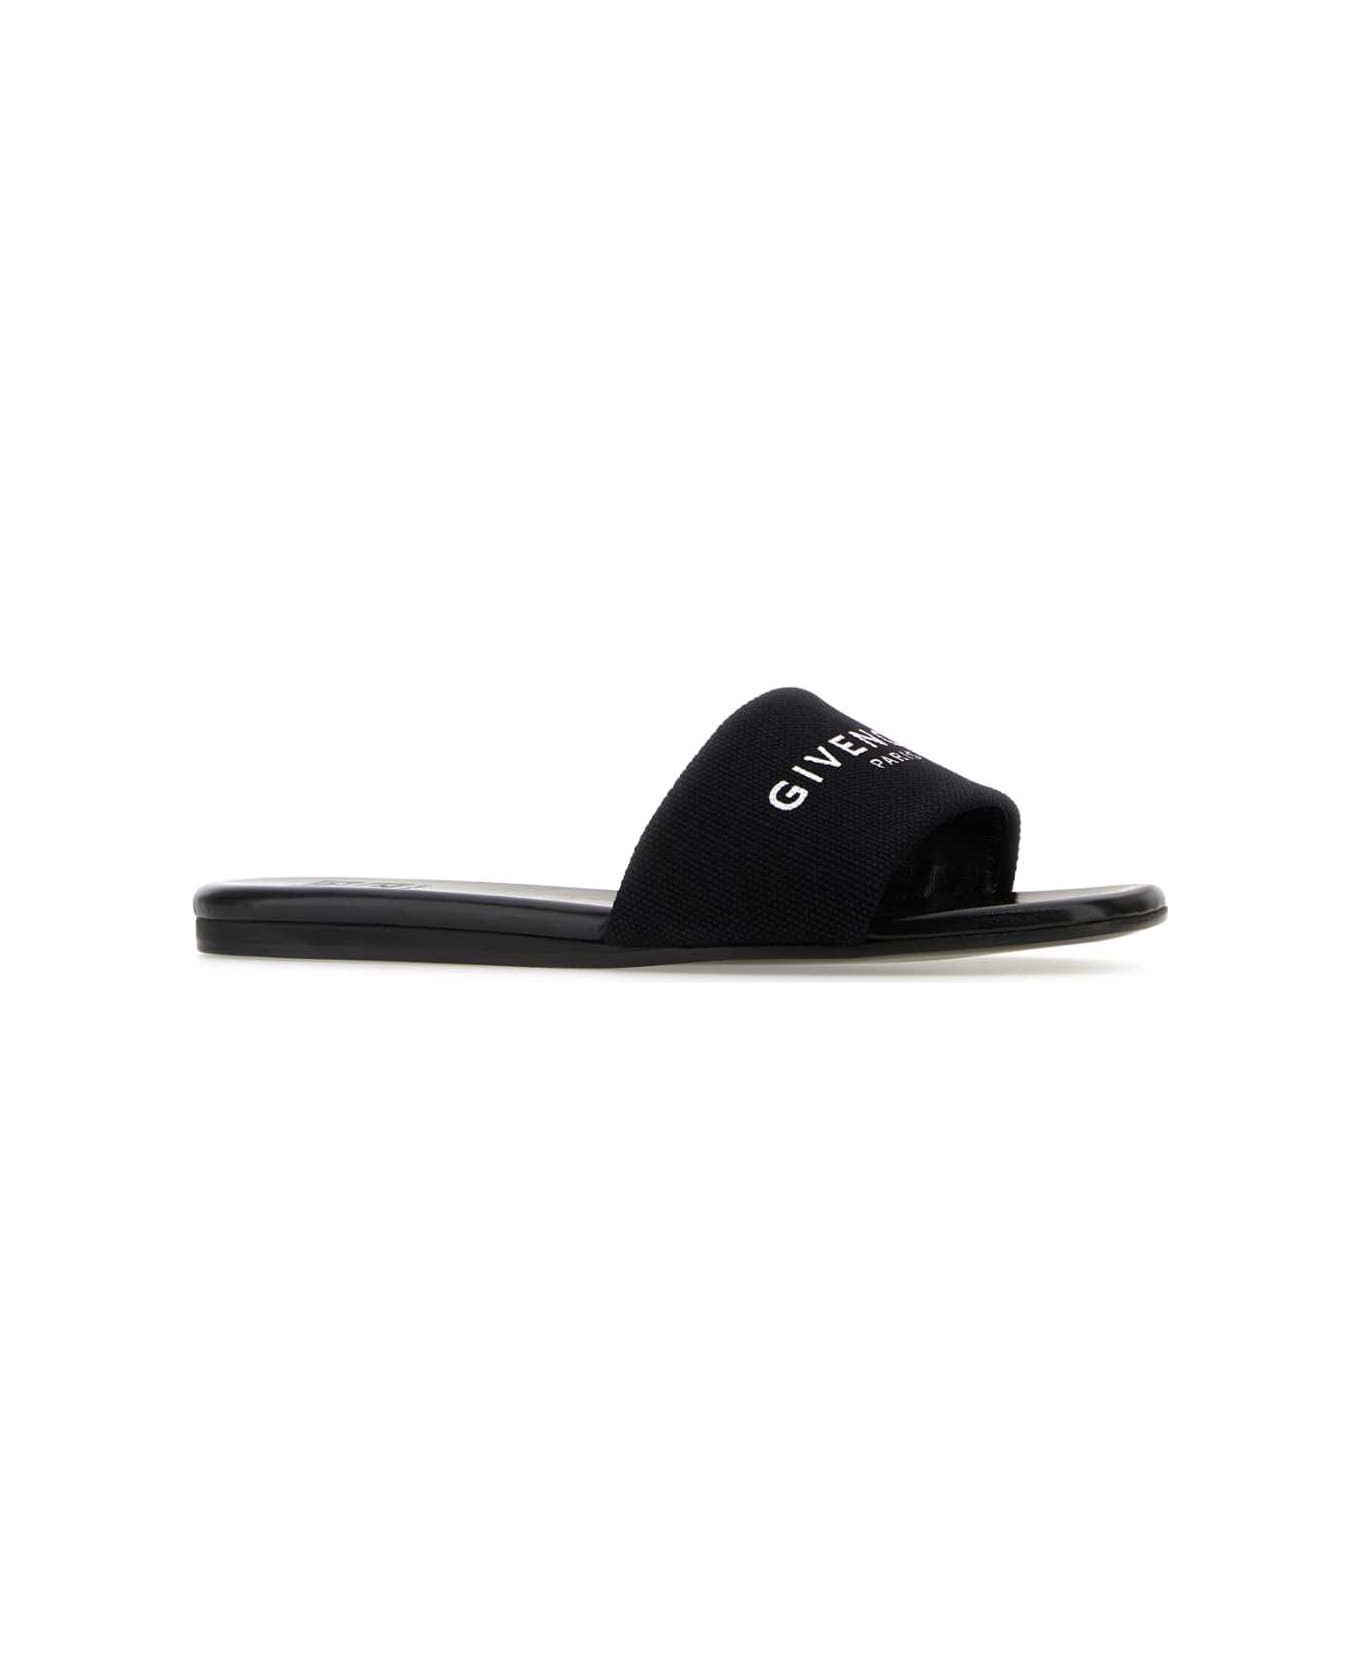 Givenchy Black Canvas 4g Slippers - BLACK